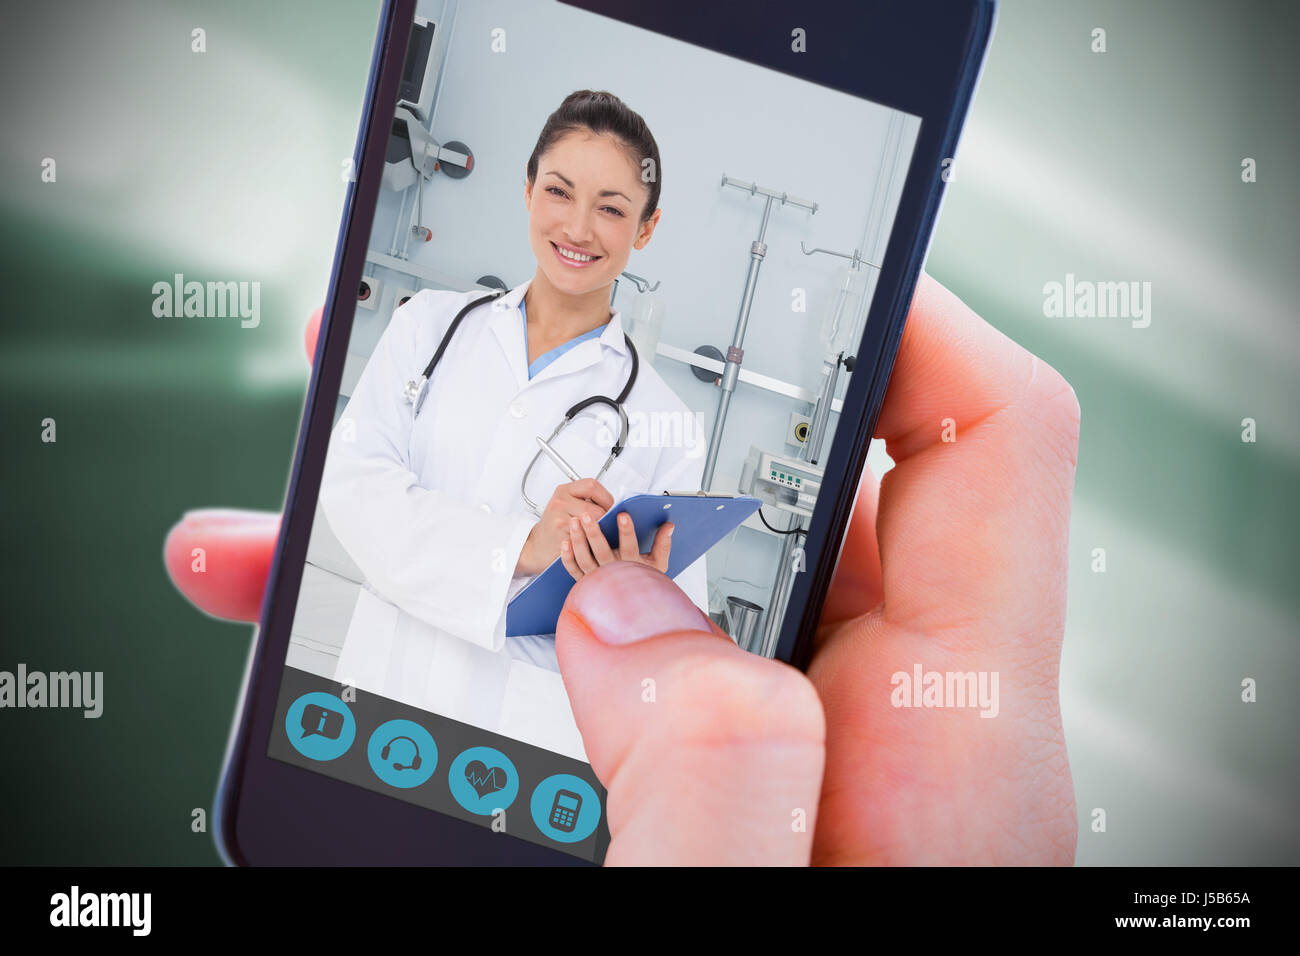 Woman using her mobile phone against sterile bedroom Stock Photo